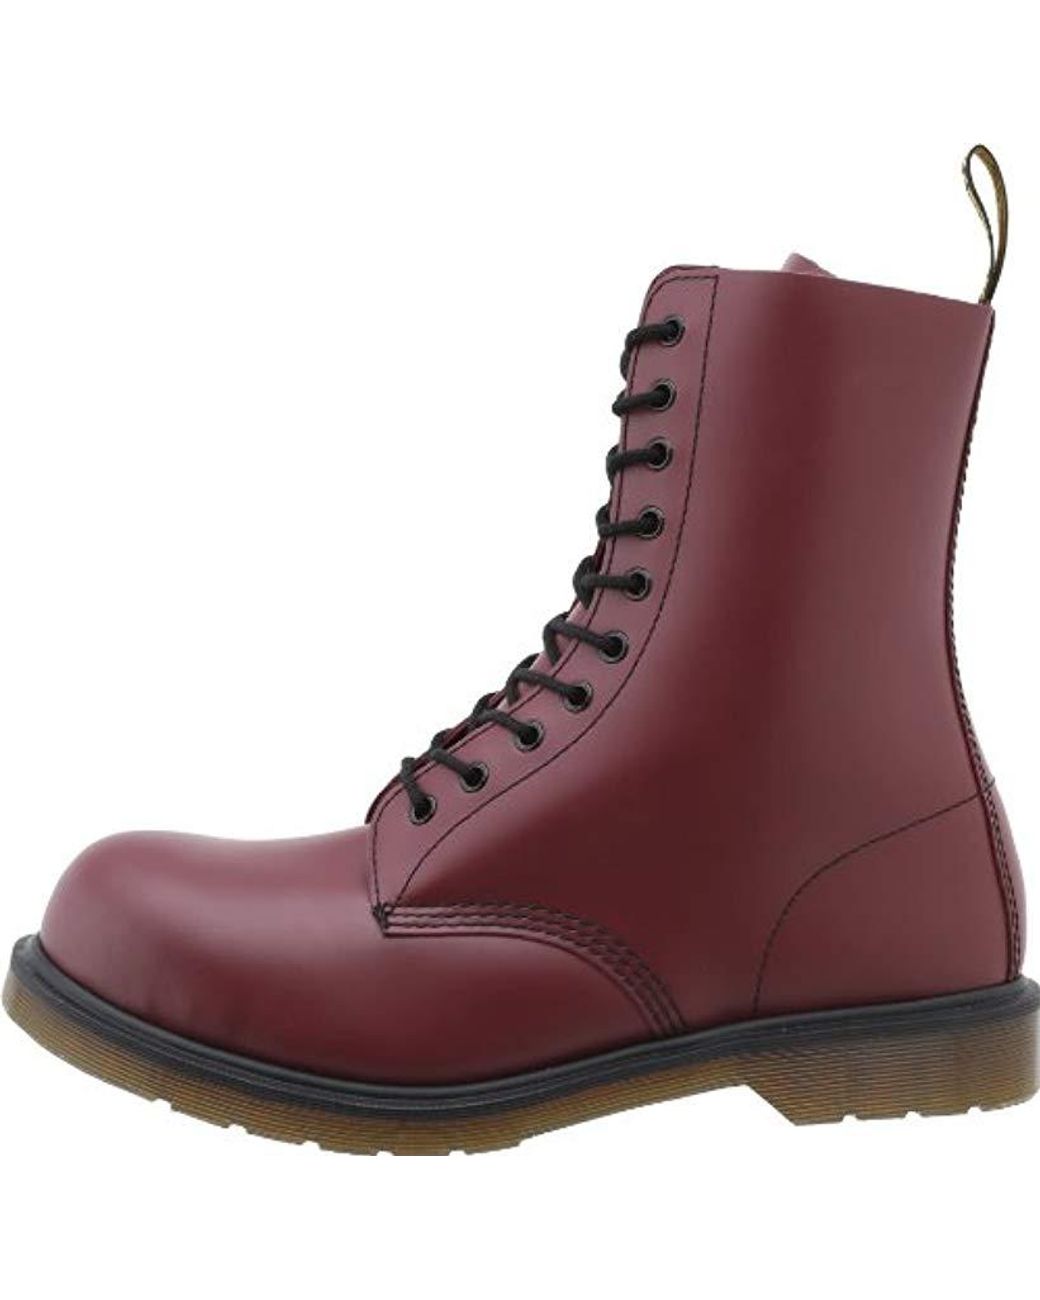 Dr. Martens 1919 Unisex Steel Toe Leather Boot in Cherry Red (Red) | Lyst